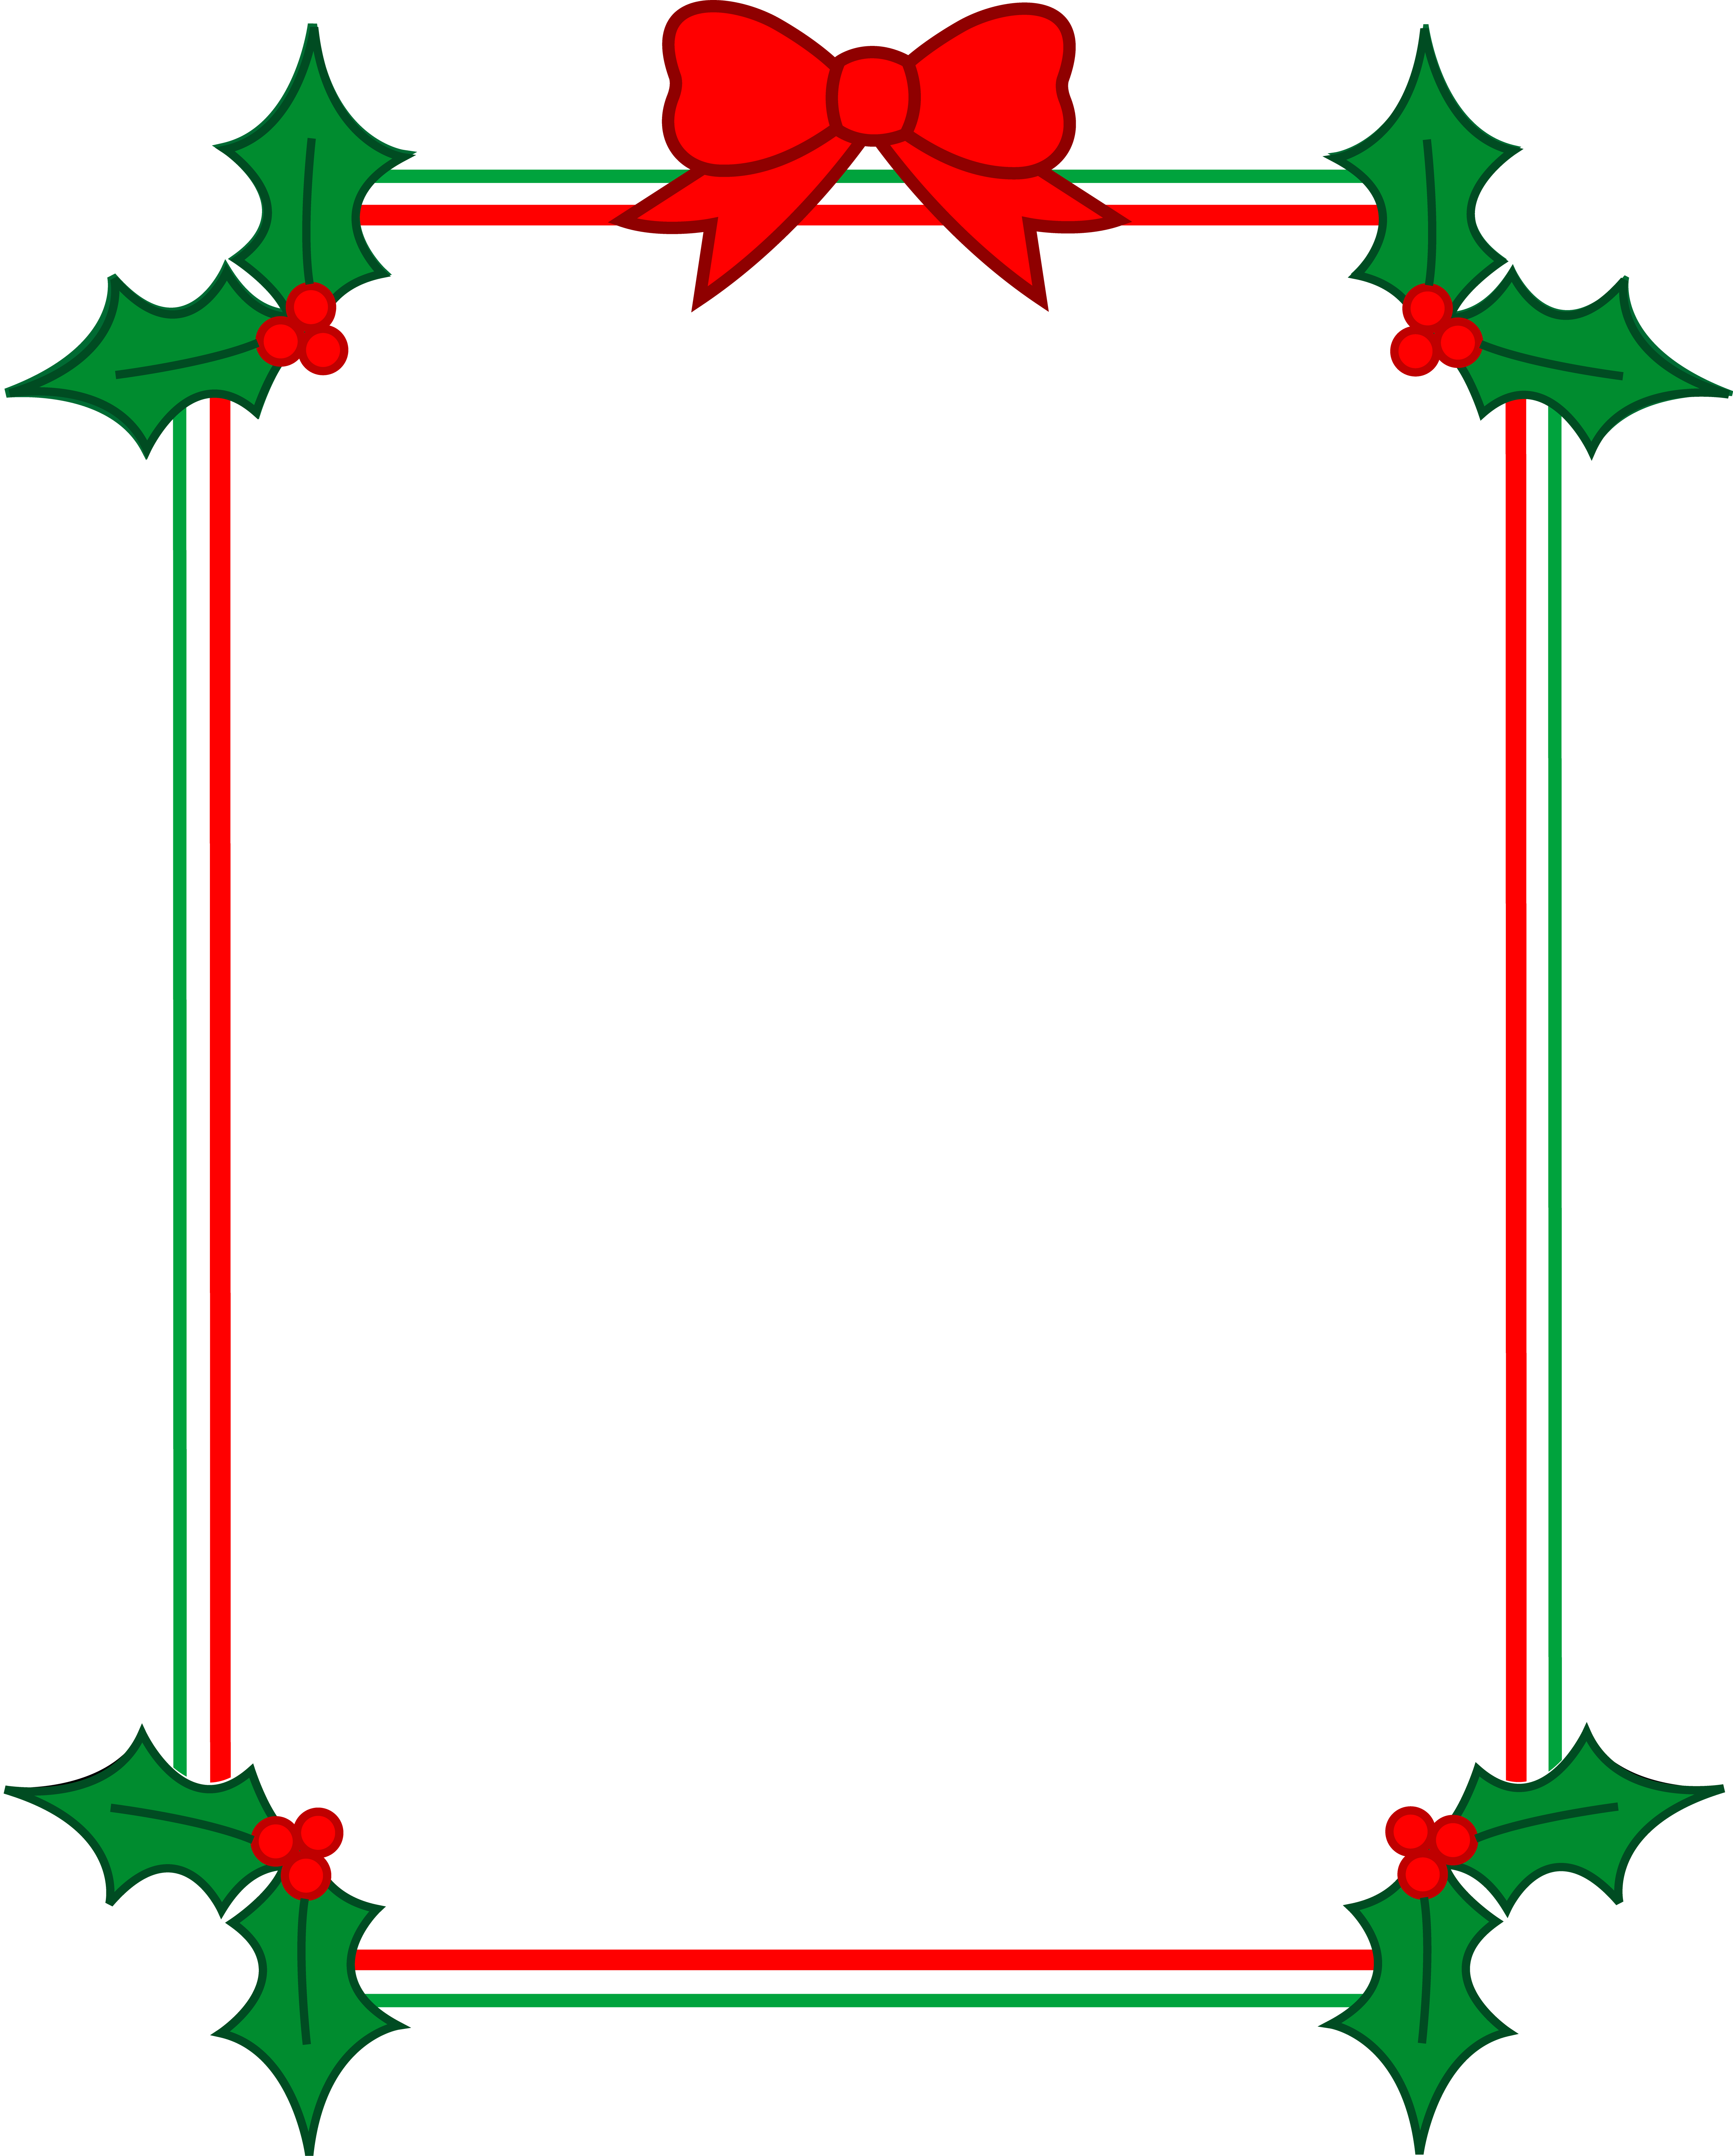 Microsoft office free holiday clipart